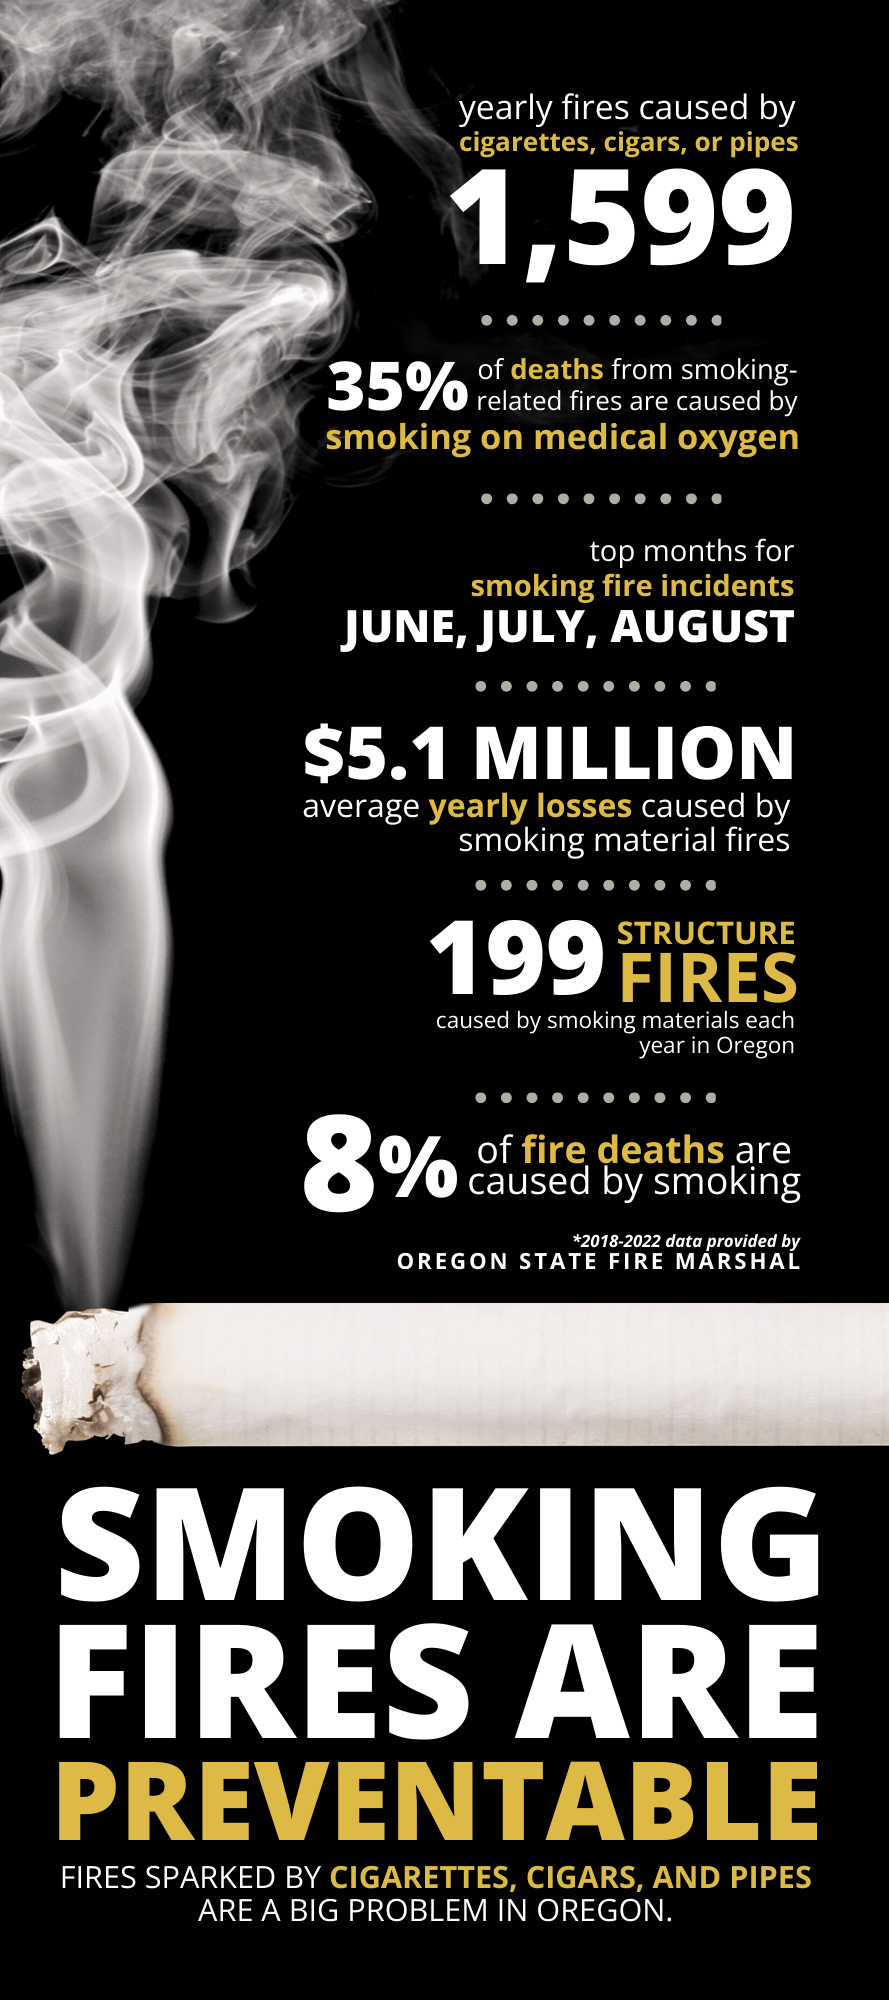 Image of the front side of the Smoking Material Fire Prevention rack card.